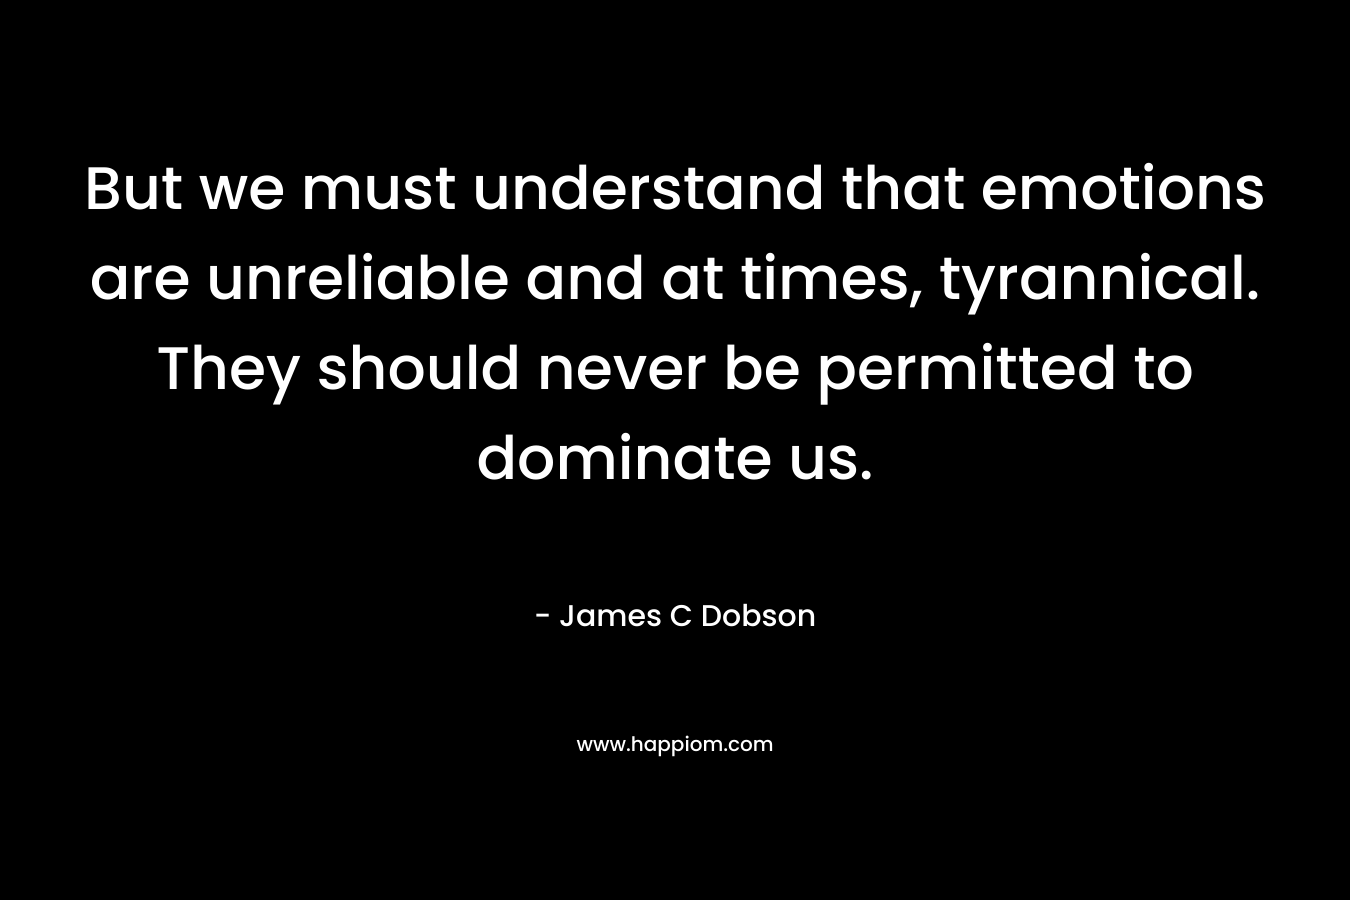 But we must understand that emotions are unreliable and at times, tyrannical. They should never be permitted to dominate us. – James C Dobson